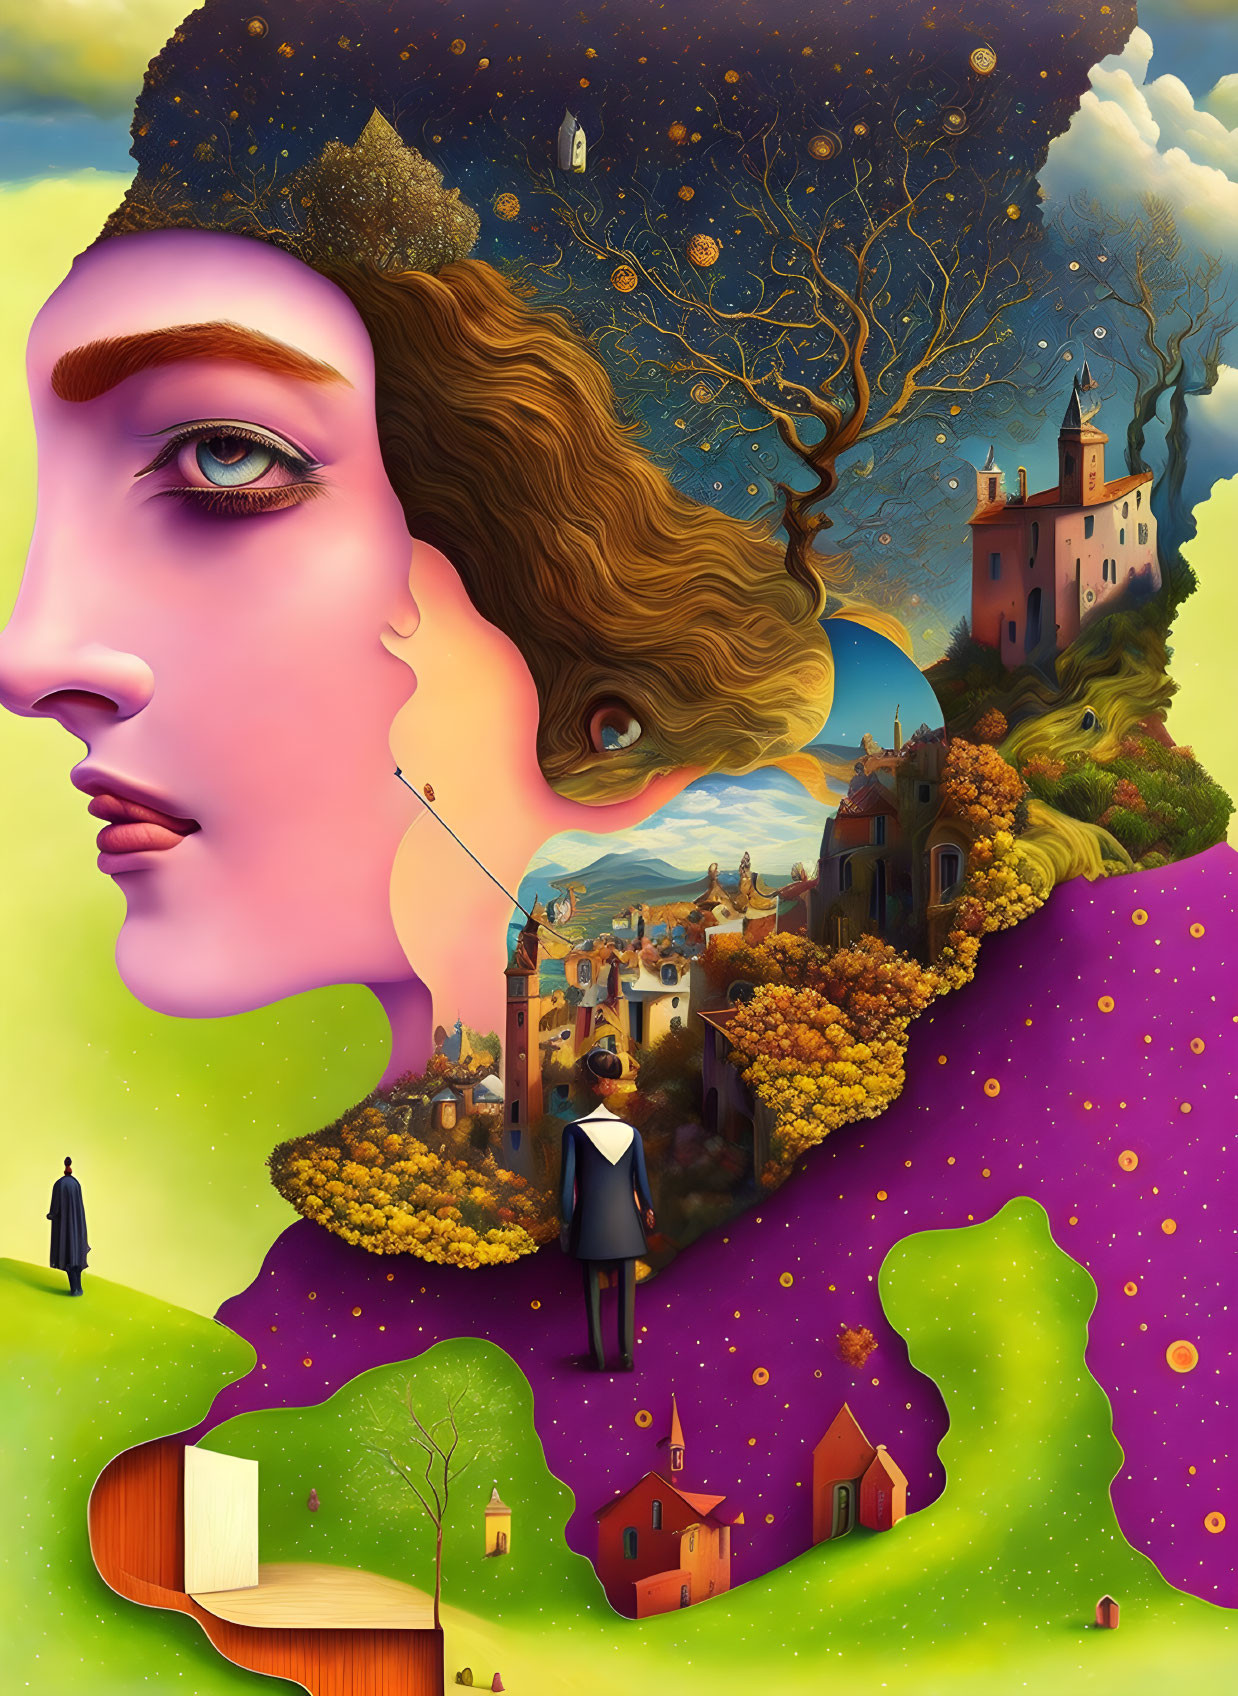 Surreal Woman's Profile Illustration with Landscape Fusion